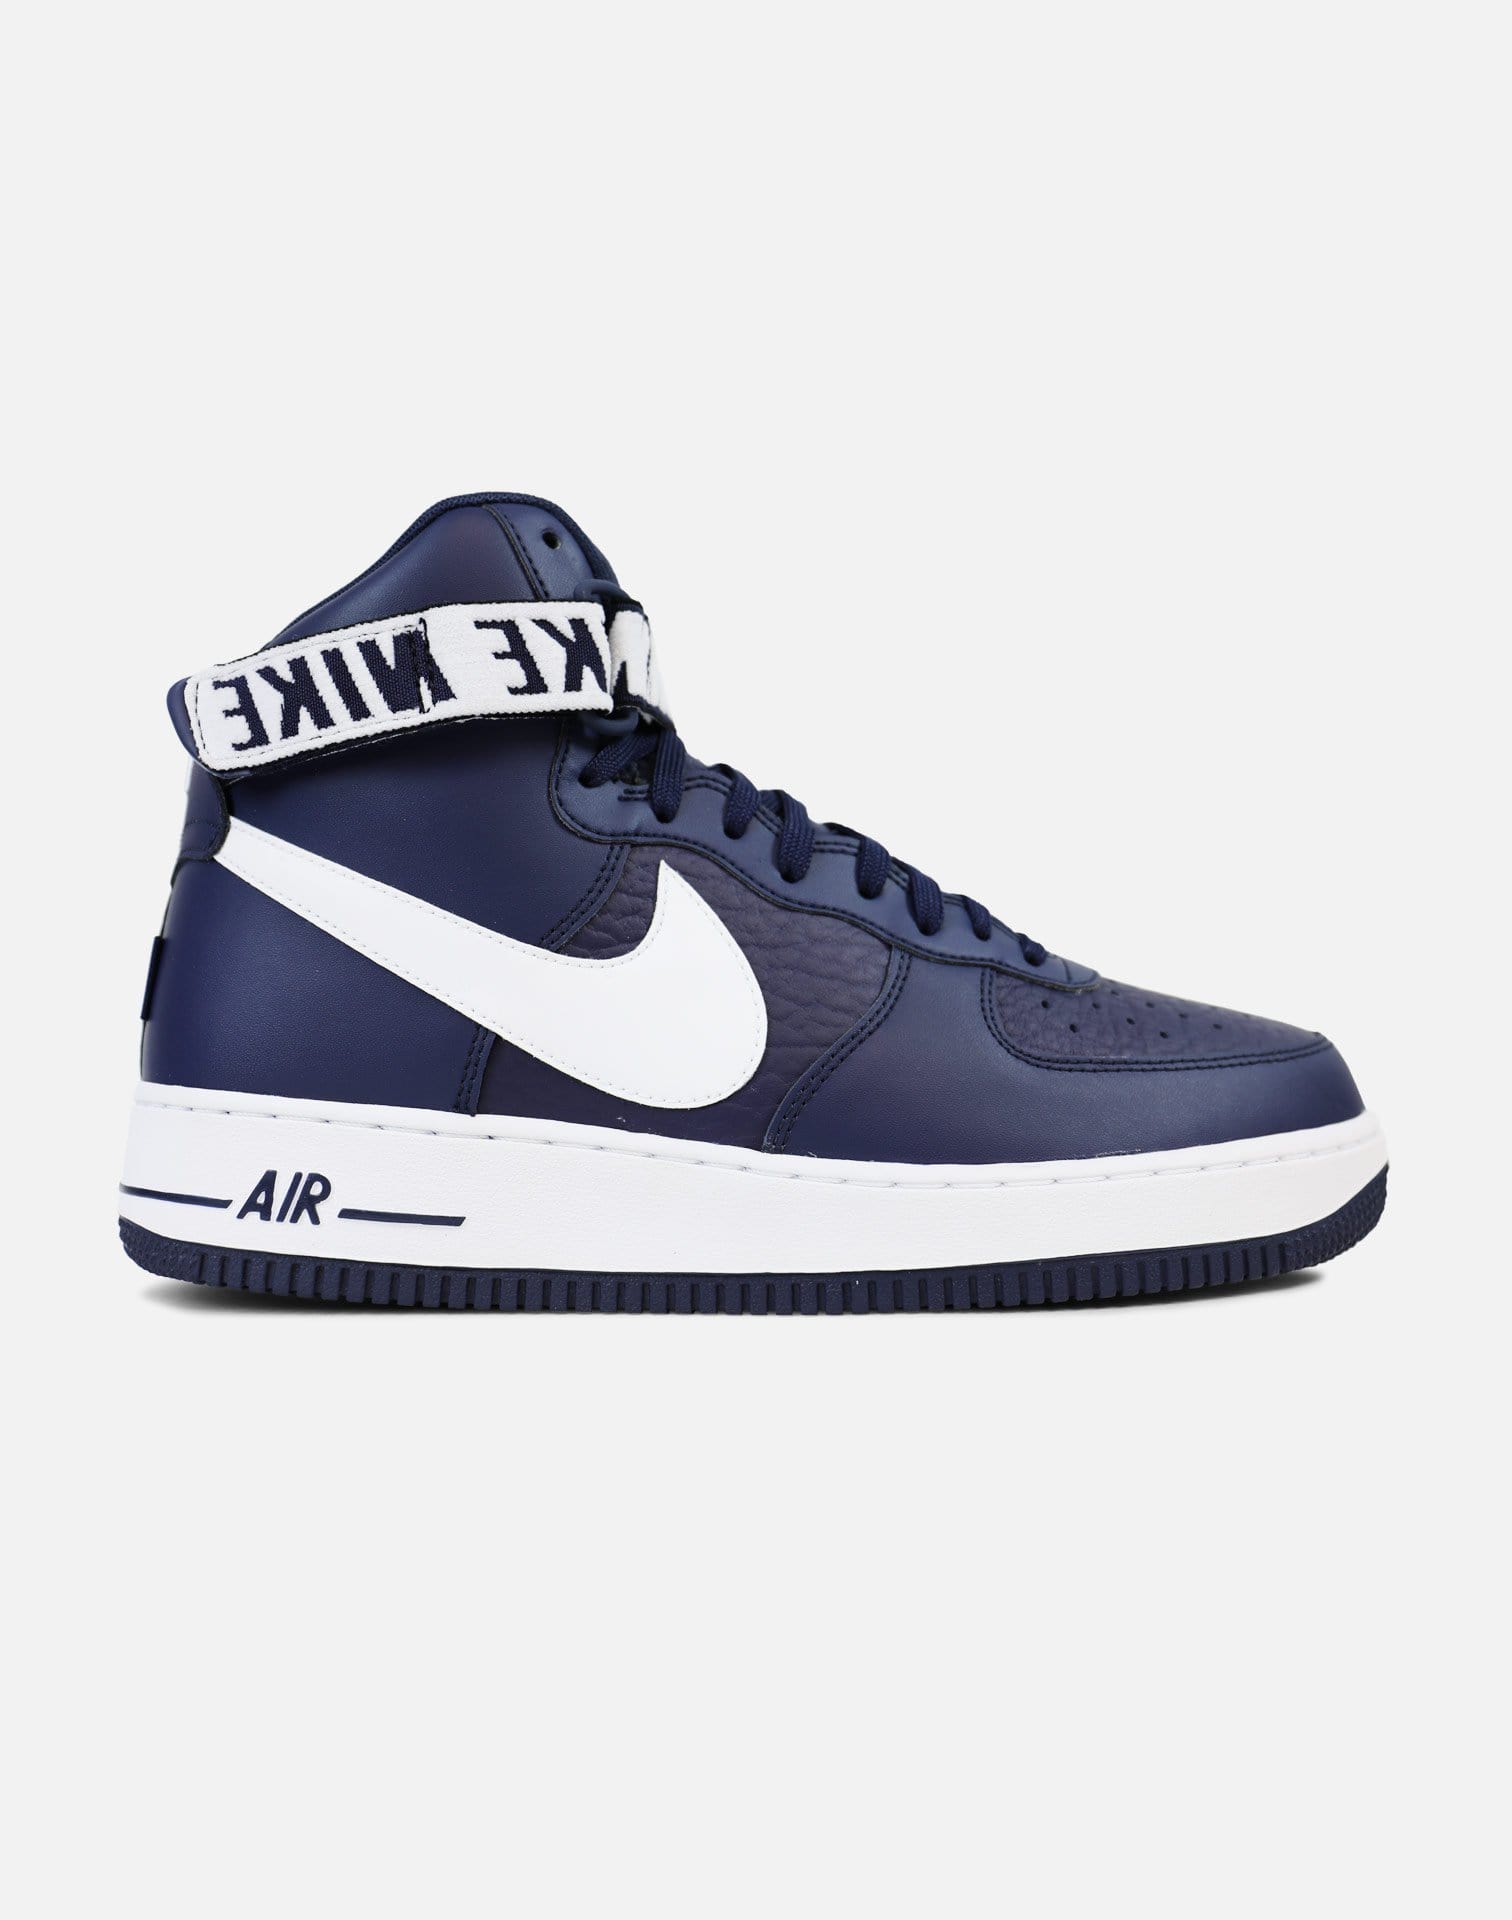 Nike Air Force 1 '07 High LV8 'Statement Game' (College Navy/White)